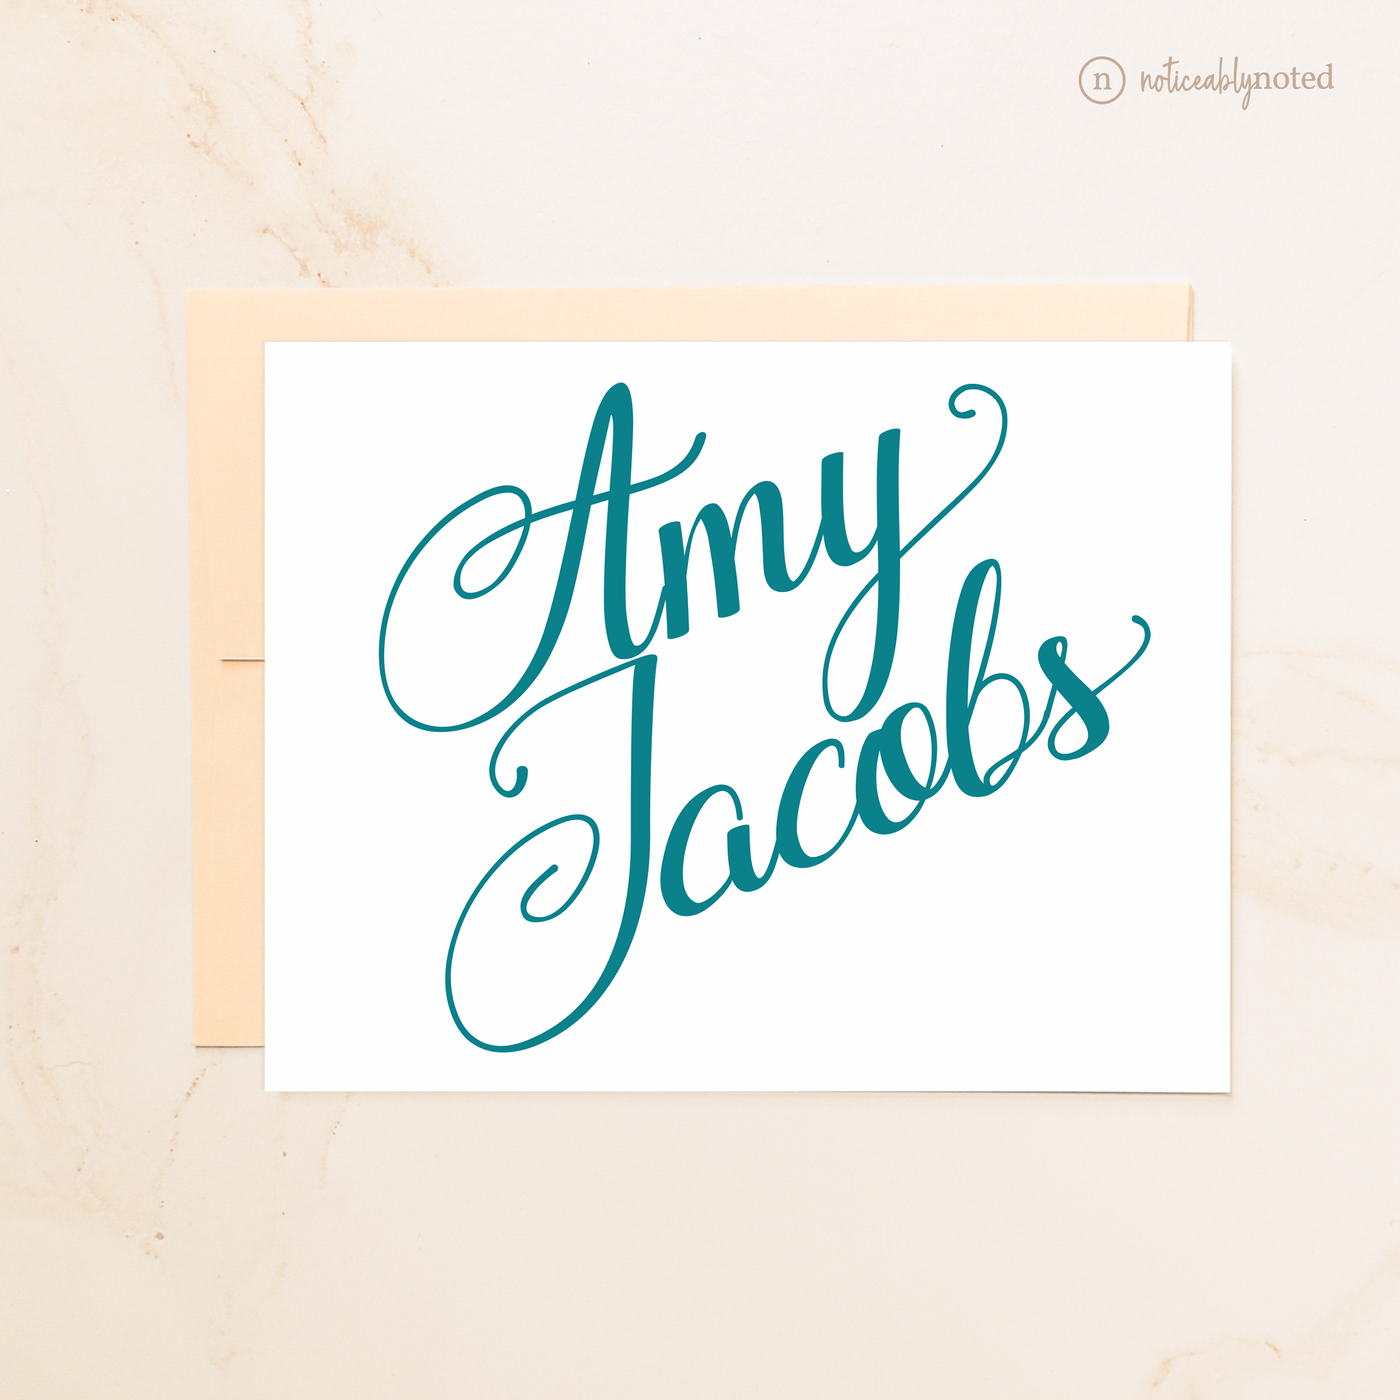 Calligraphy Personalized Note Cards | Noticeably Noted